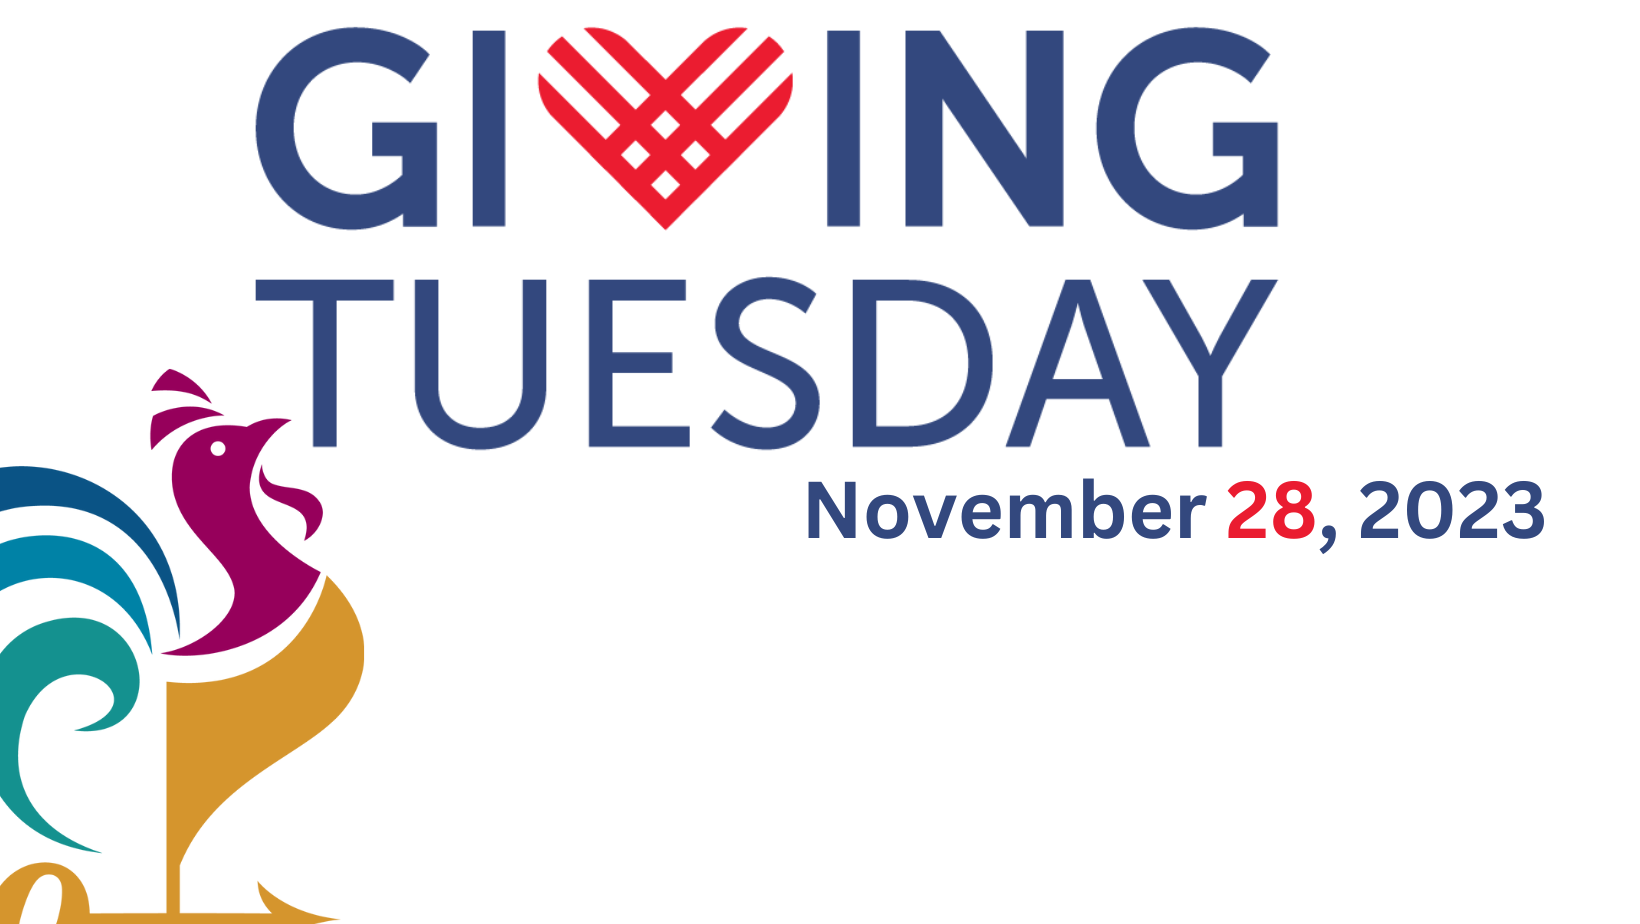 GIVING TUESDAY for WEATHERVANE PLAYHOUSE